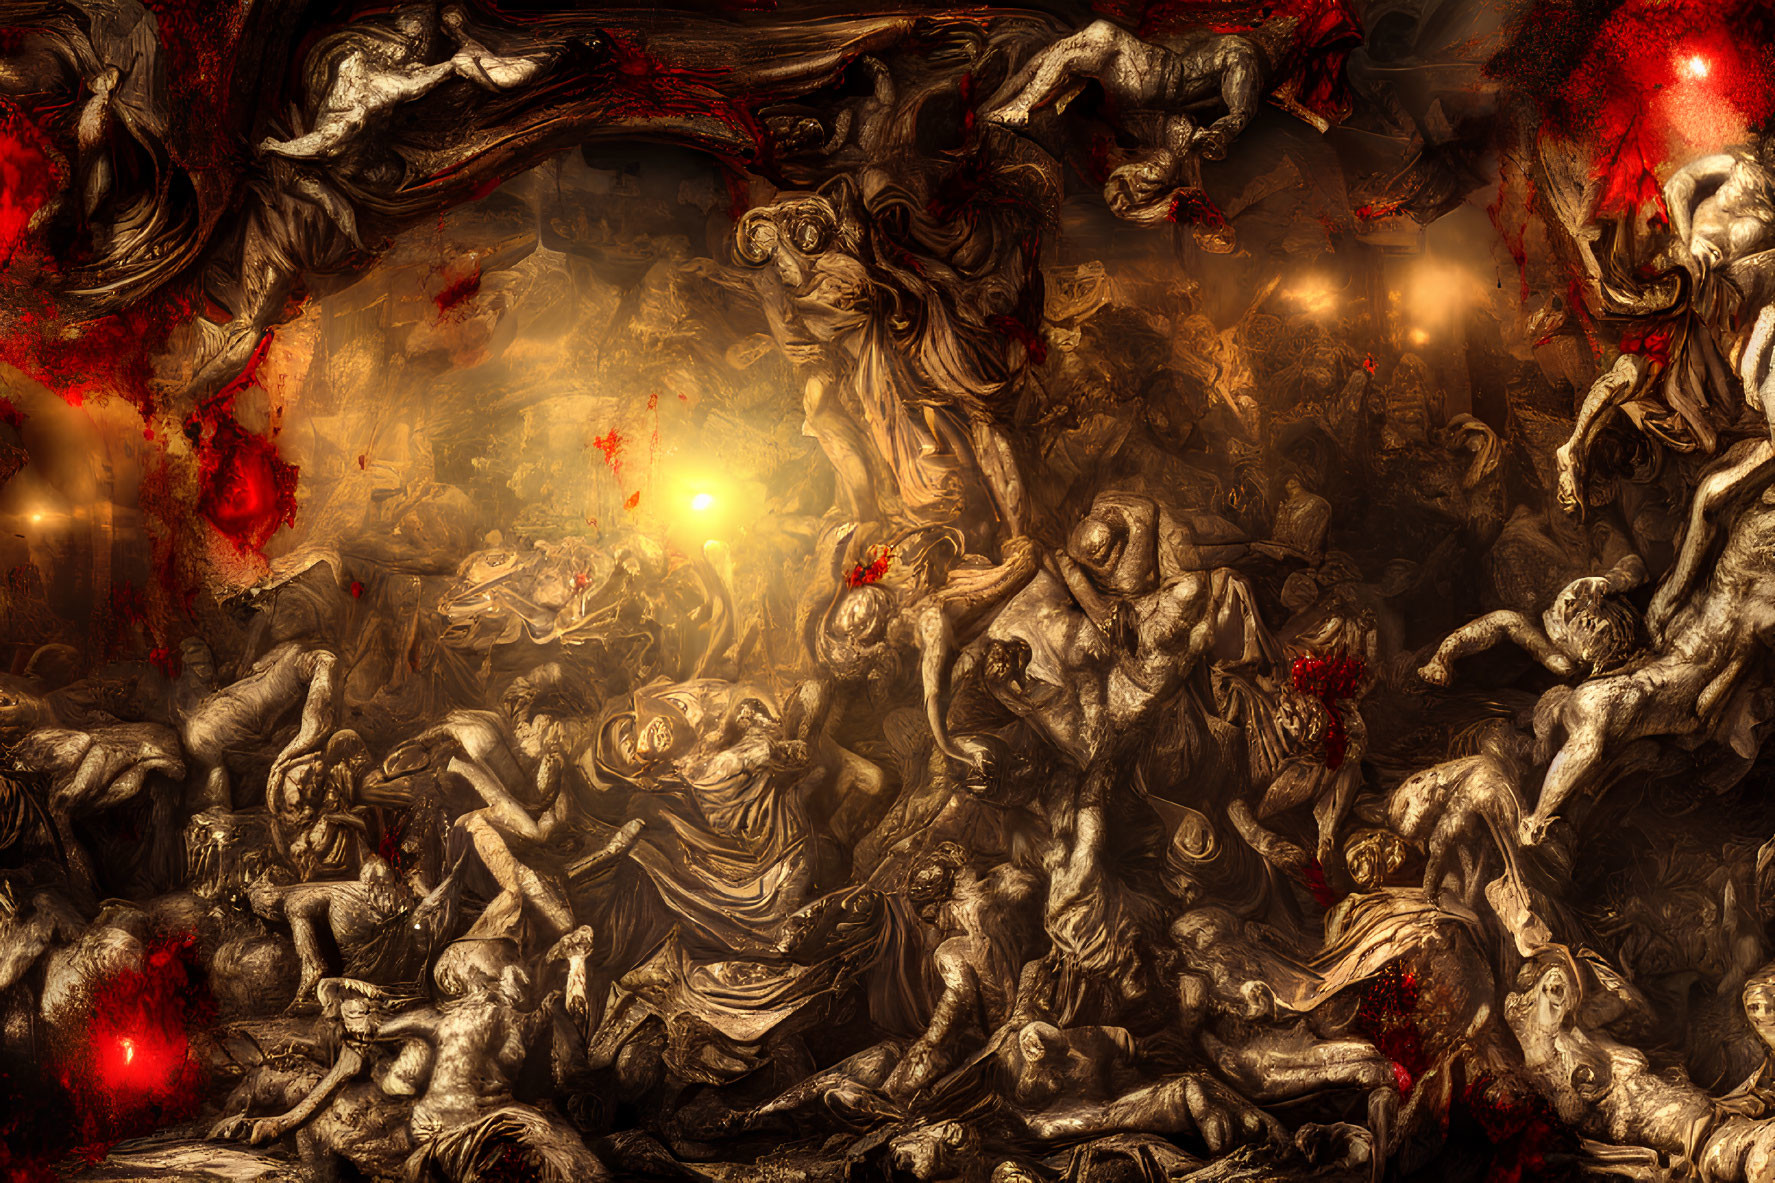 Chaotic fiery scene with figures in turmoil and central glowing light